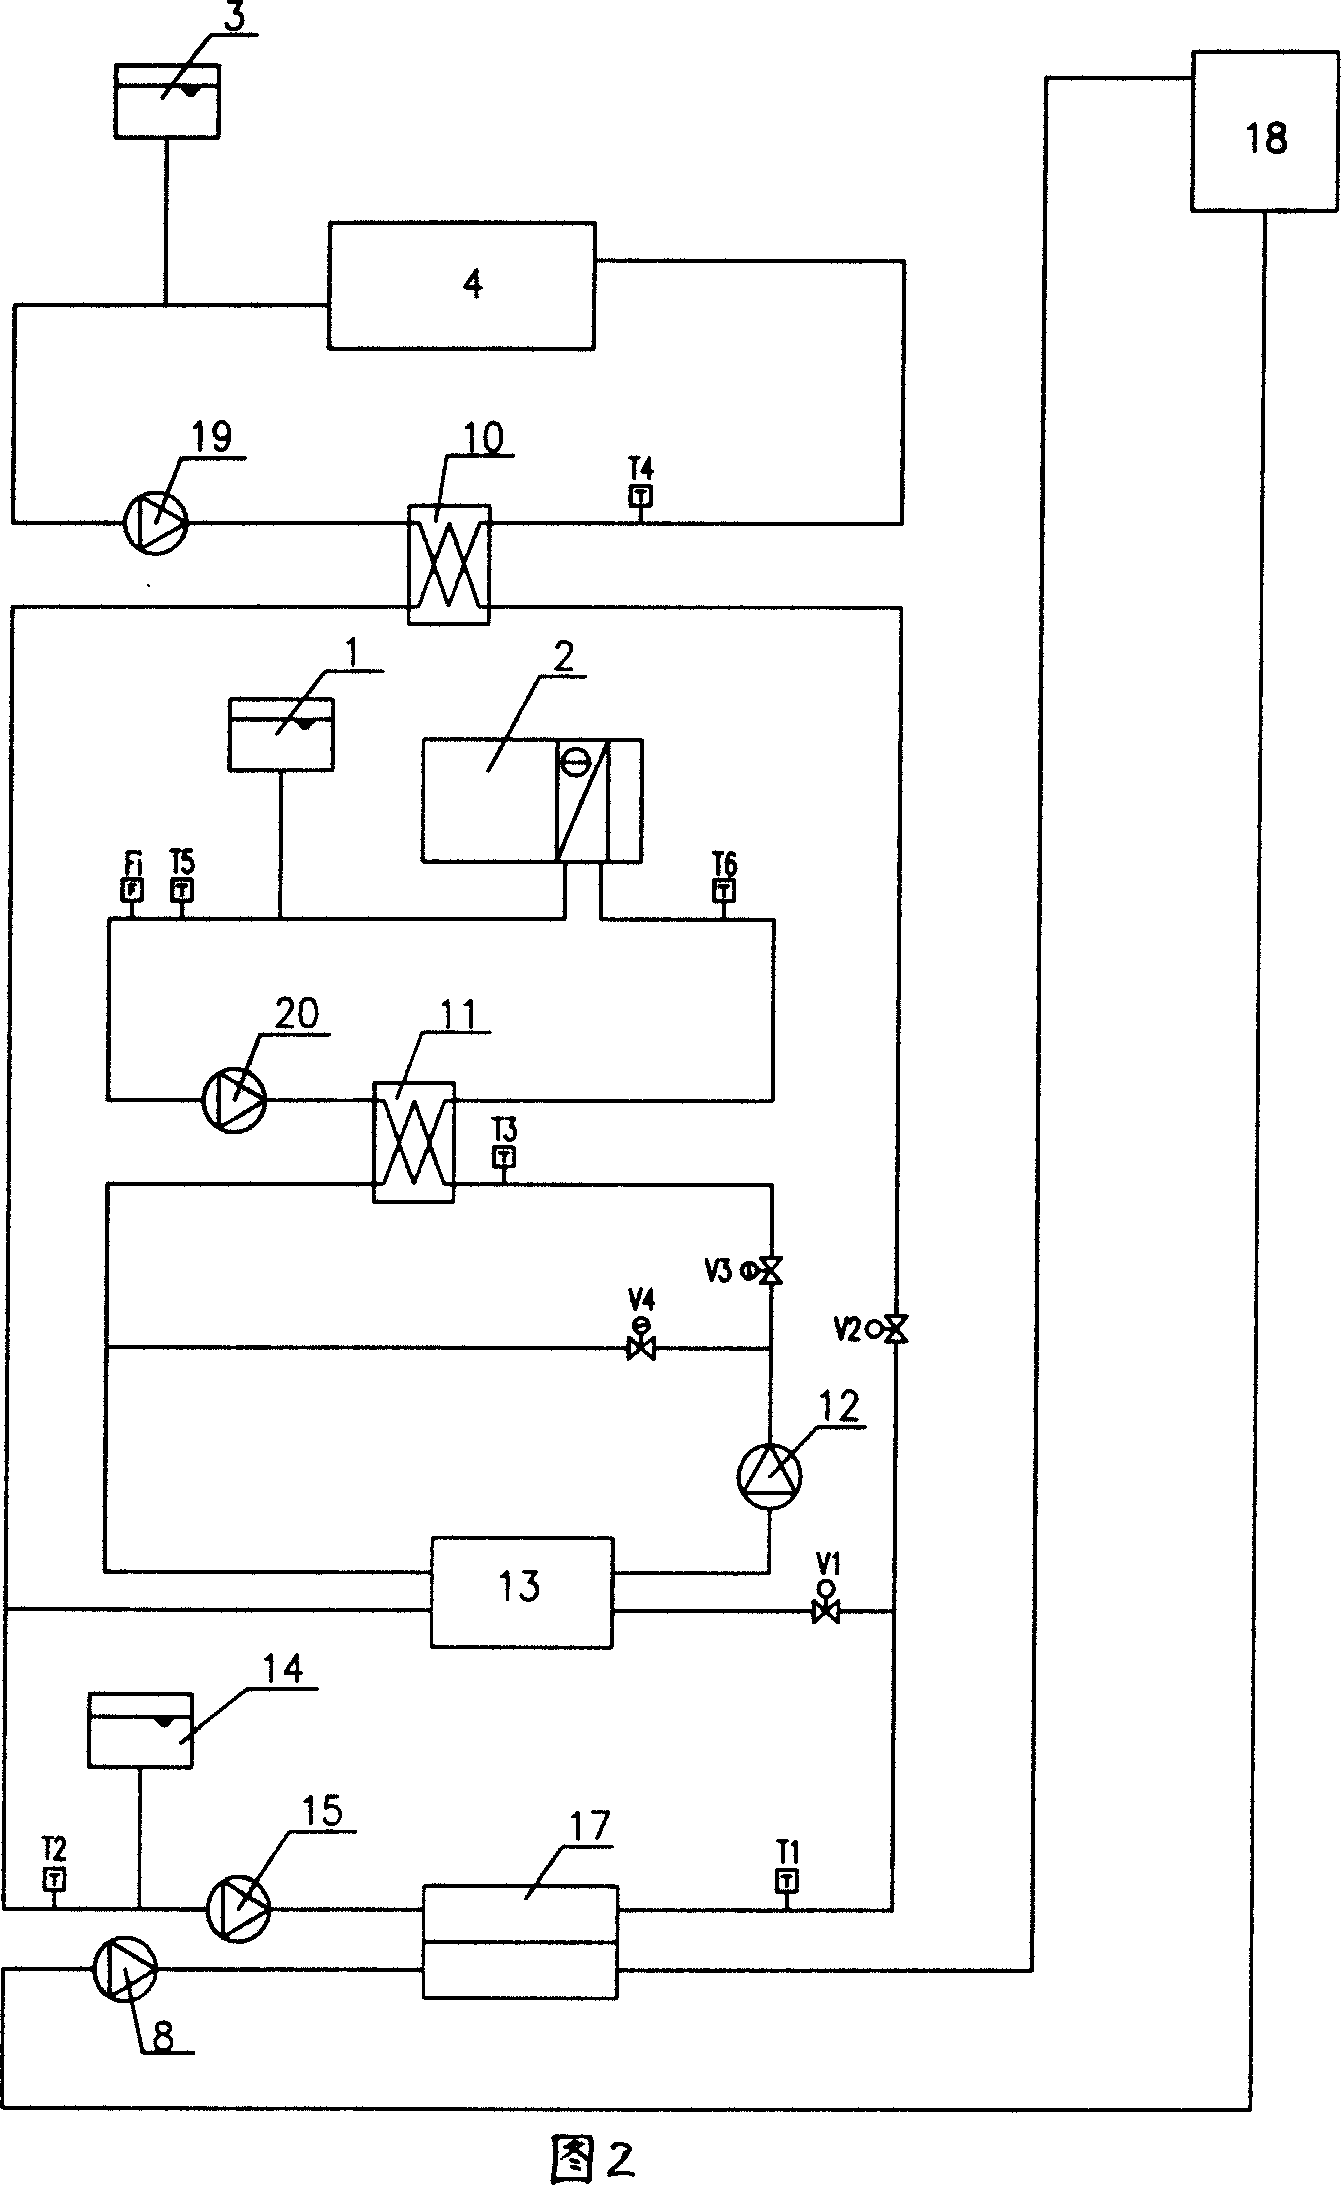 Temperature and humidity individual control air conditioner system